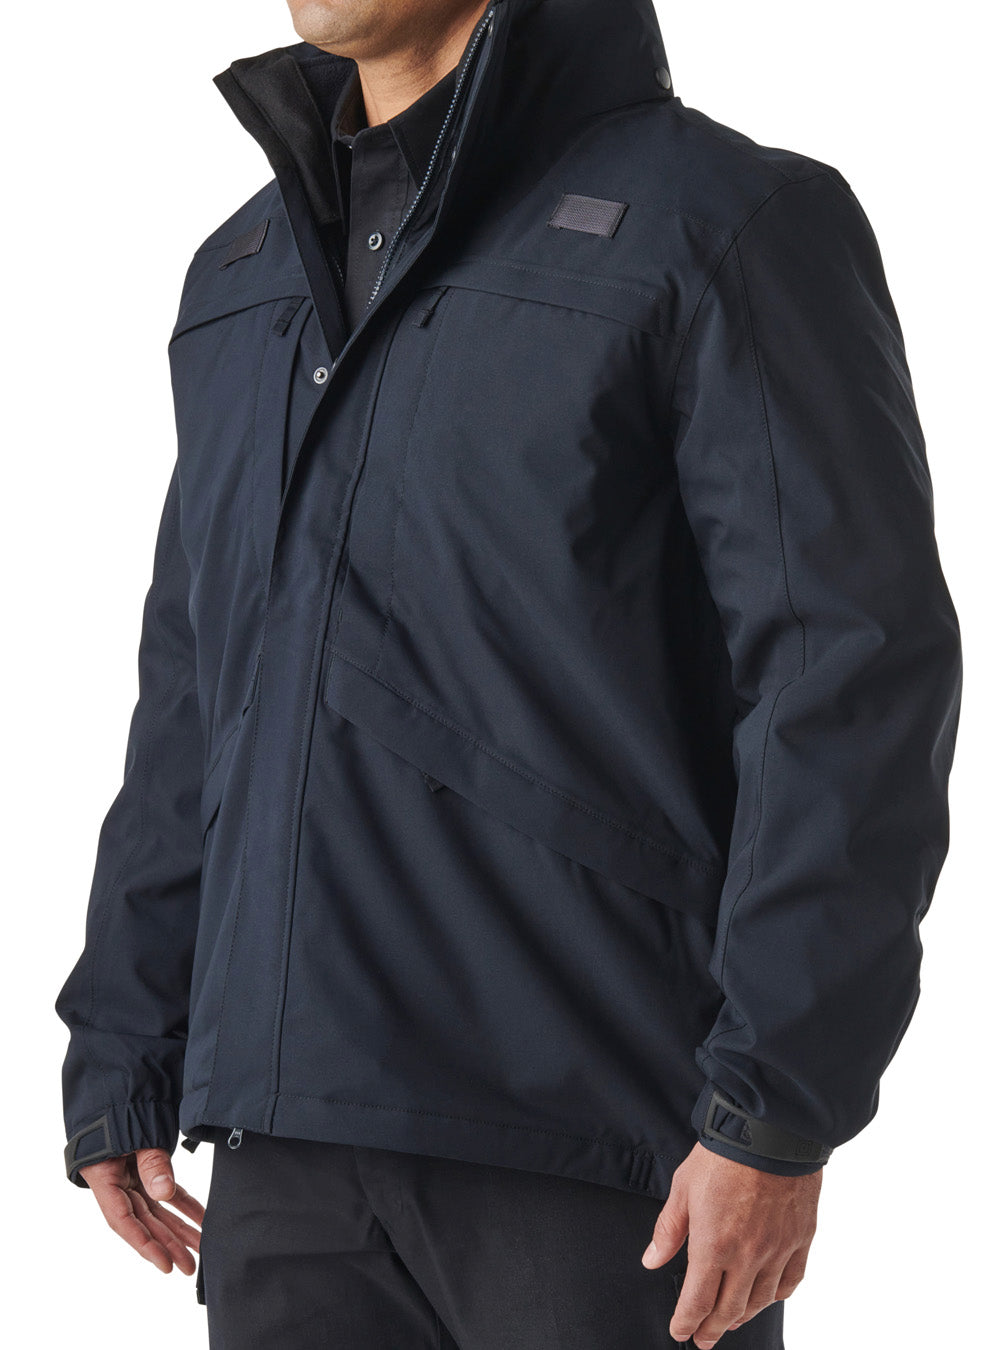 5.11 Tactical 3-in-1 Parka 2.0 - TacSource